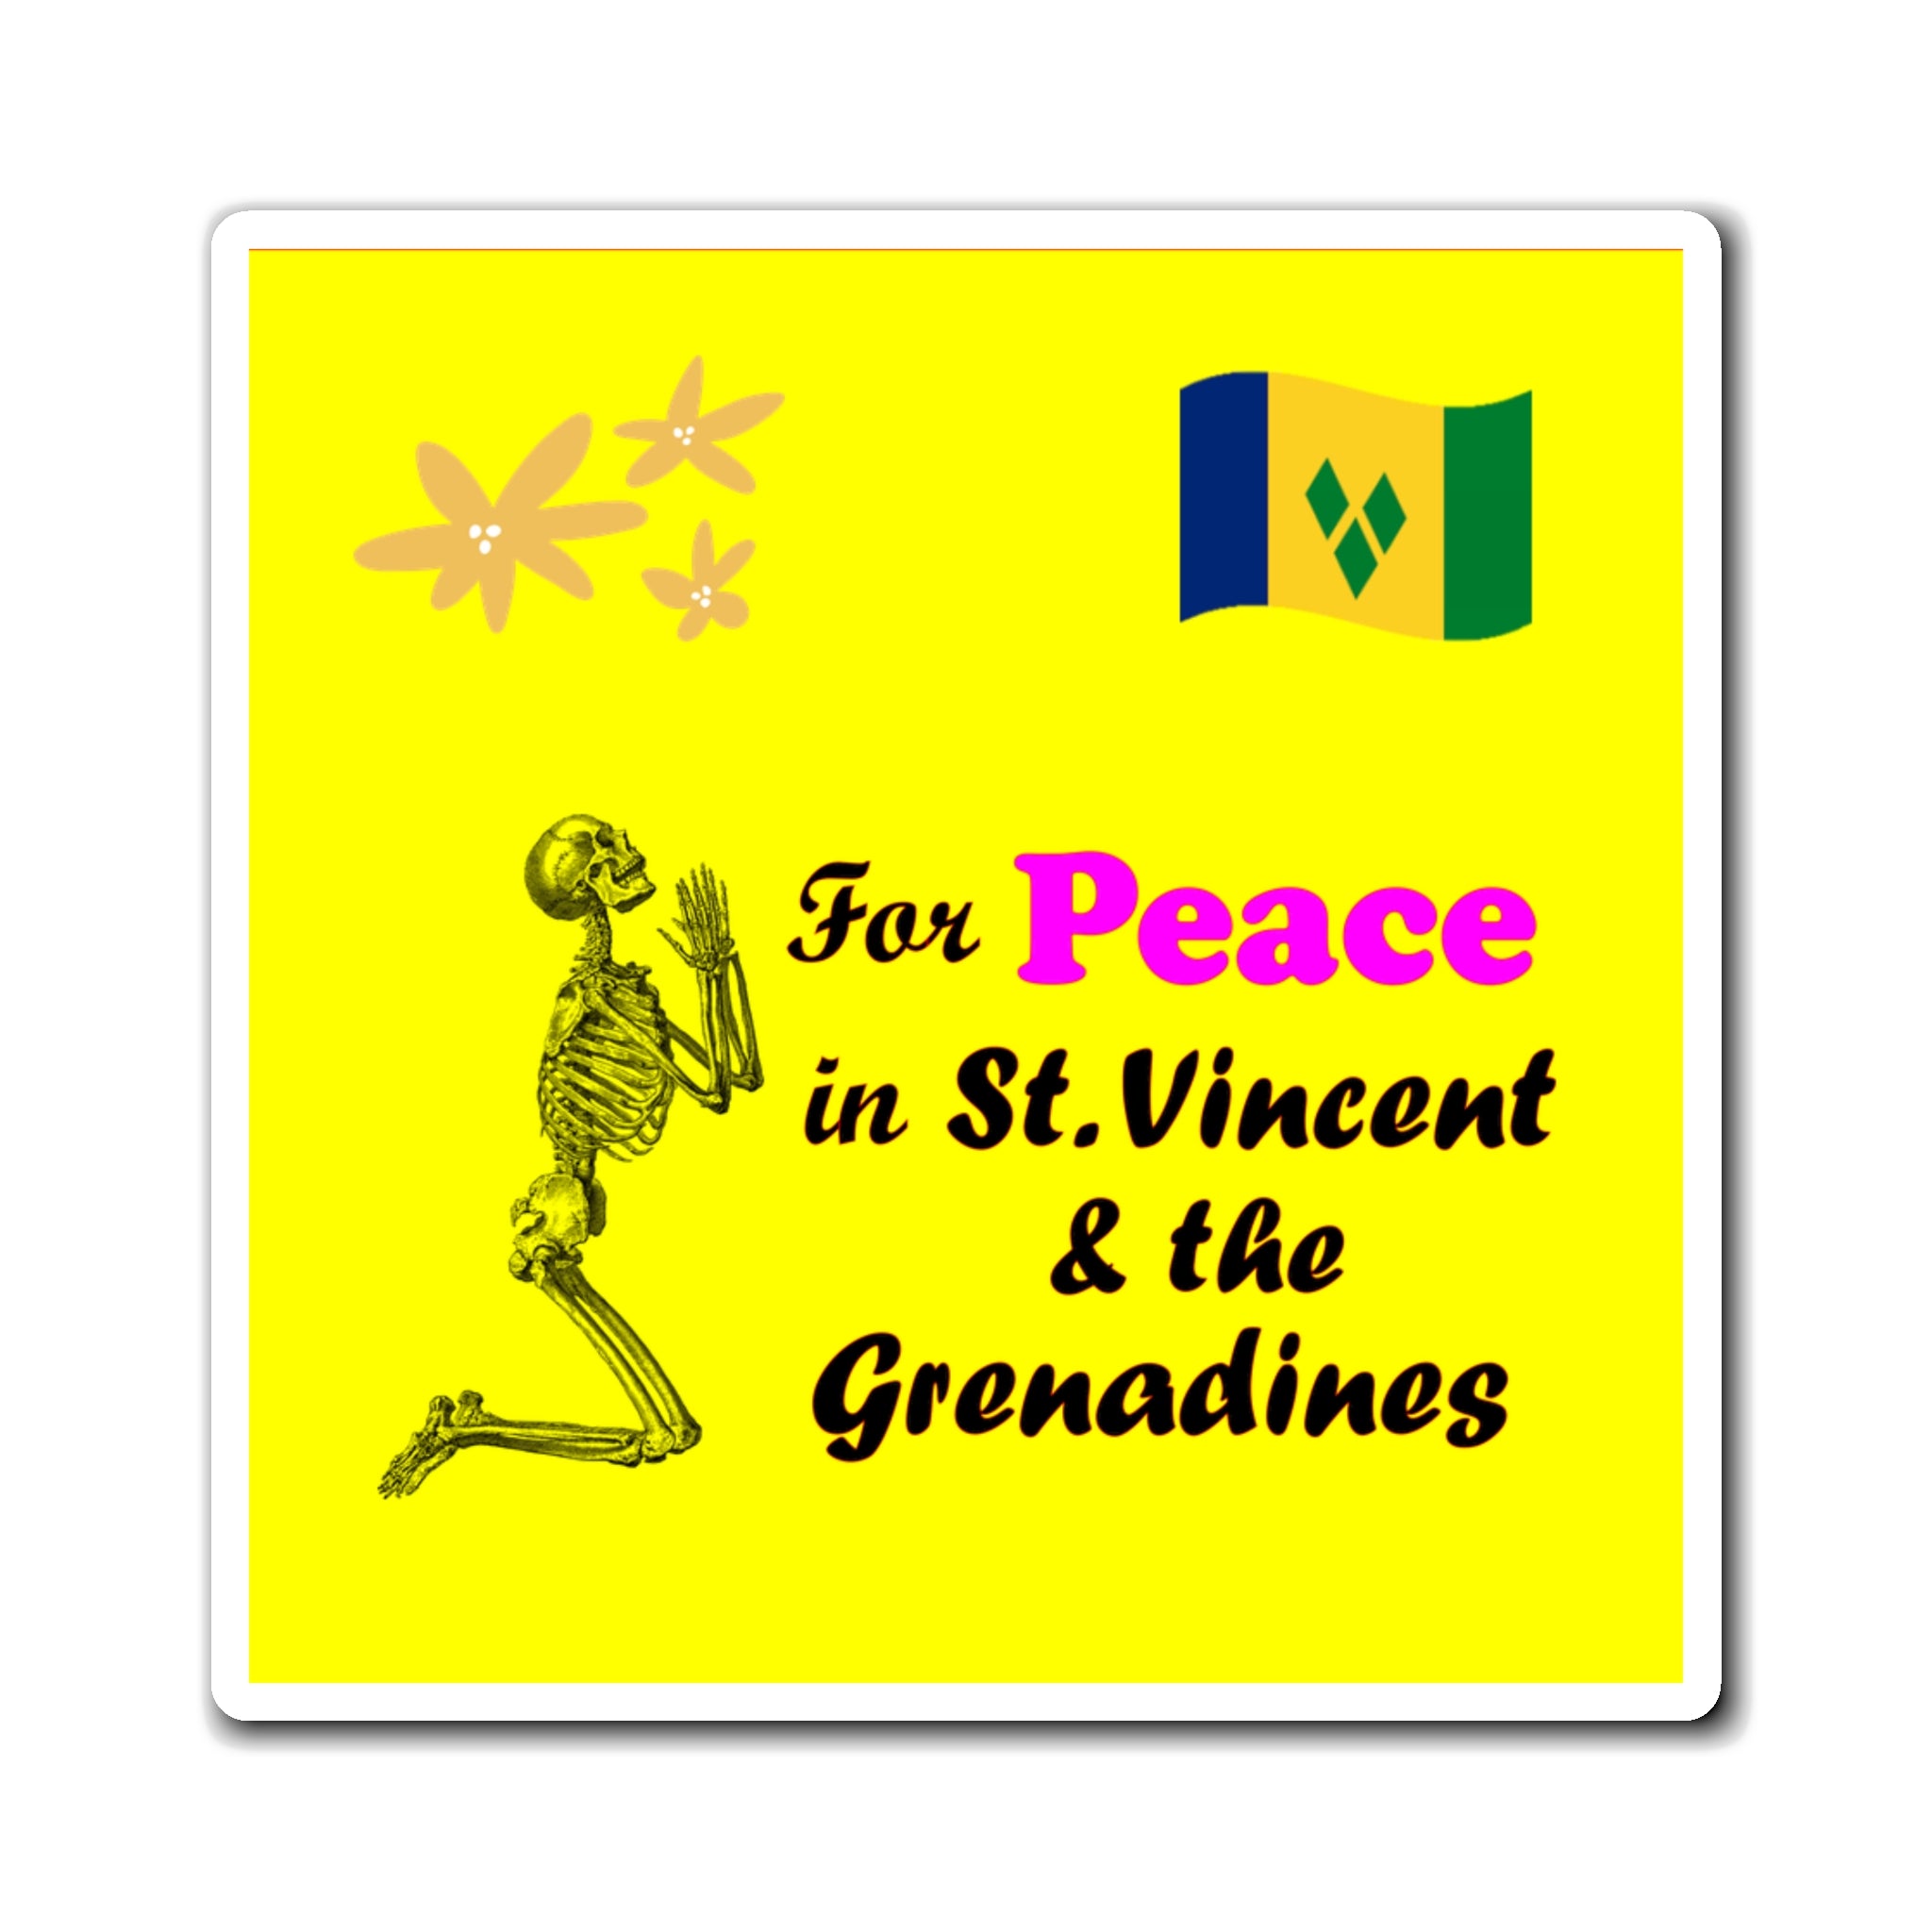 St. Vincent and the Grenadines Praying For Peace Magnet